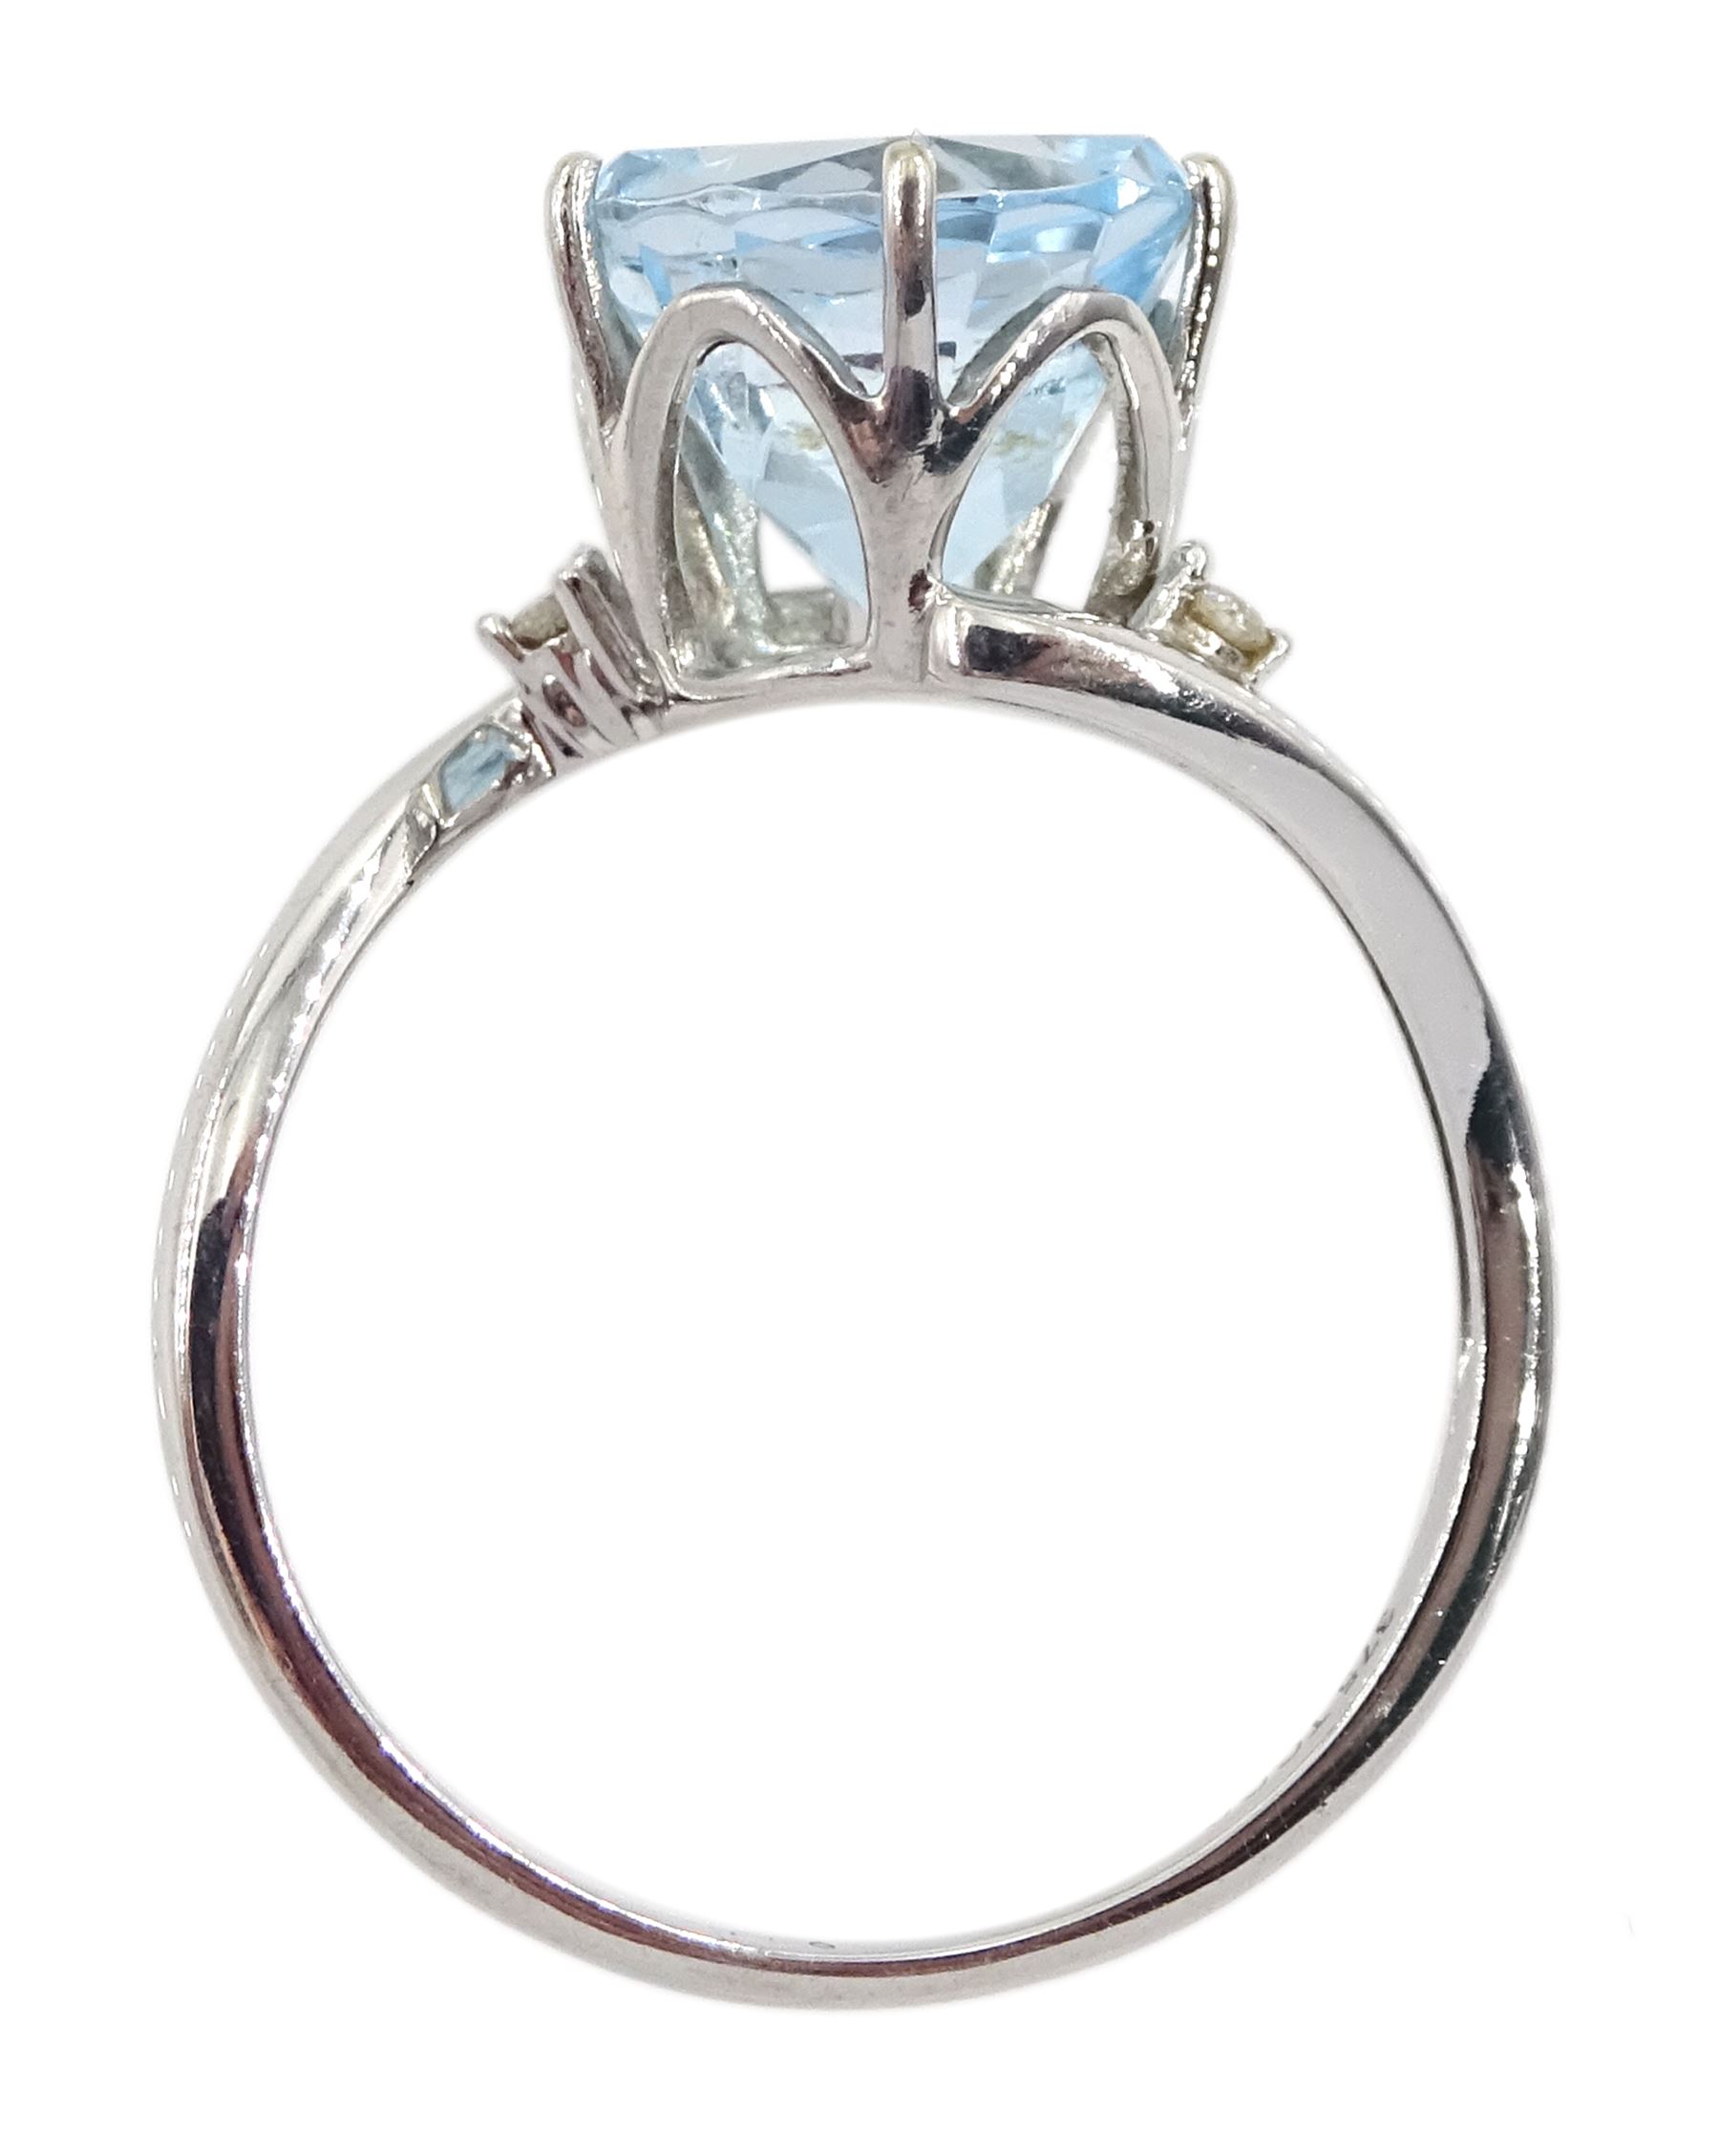 9ct white gold round blue stone and diamond chip ring - Image 3 of 4